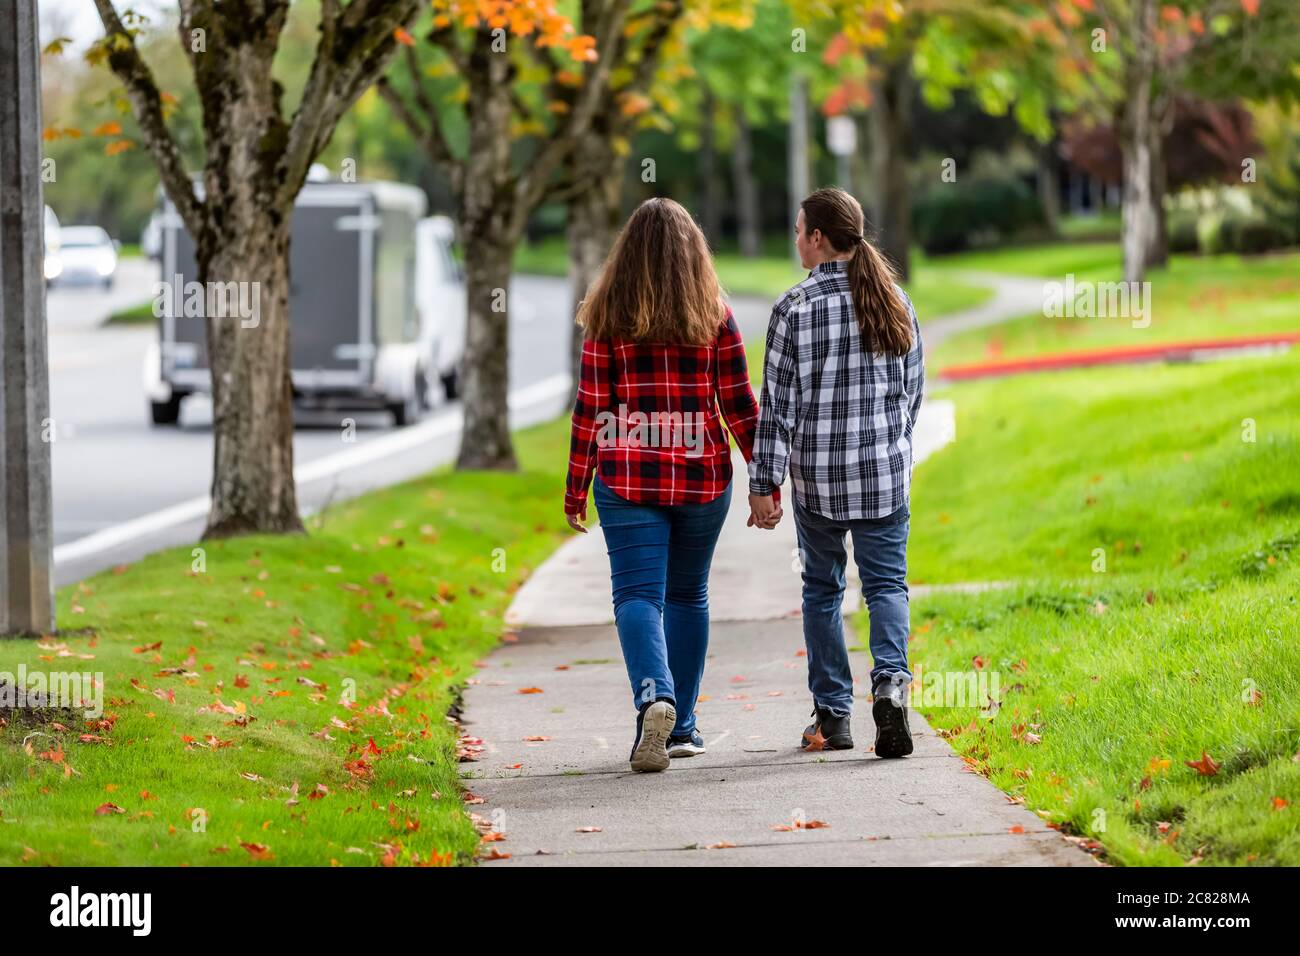 A teenage boy and girl walking down a sidewalk holding hands; Bothell, Washington, United States of America Stock Photo